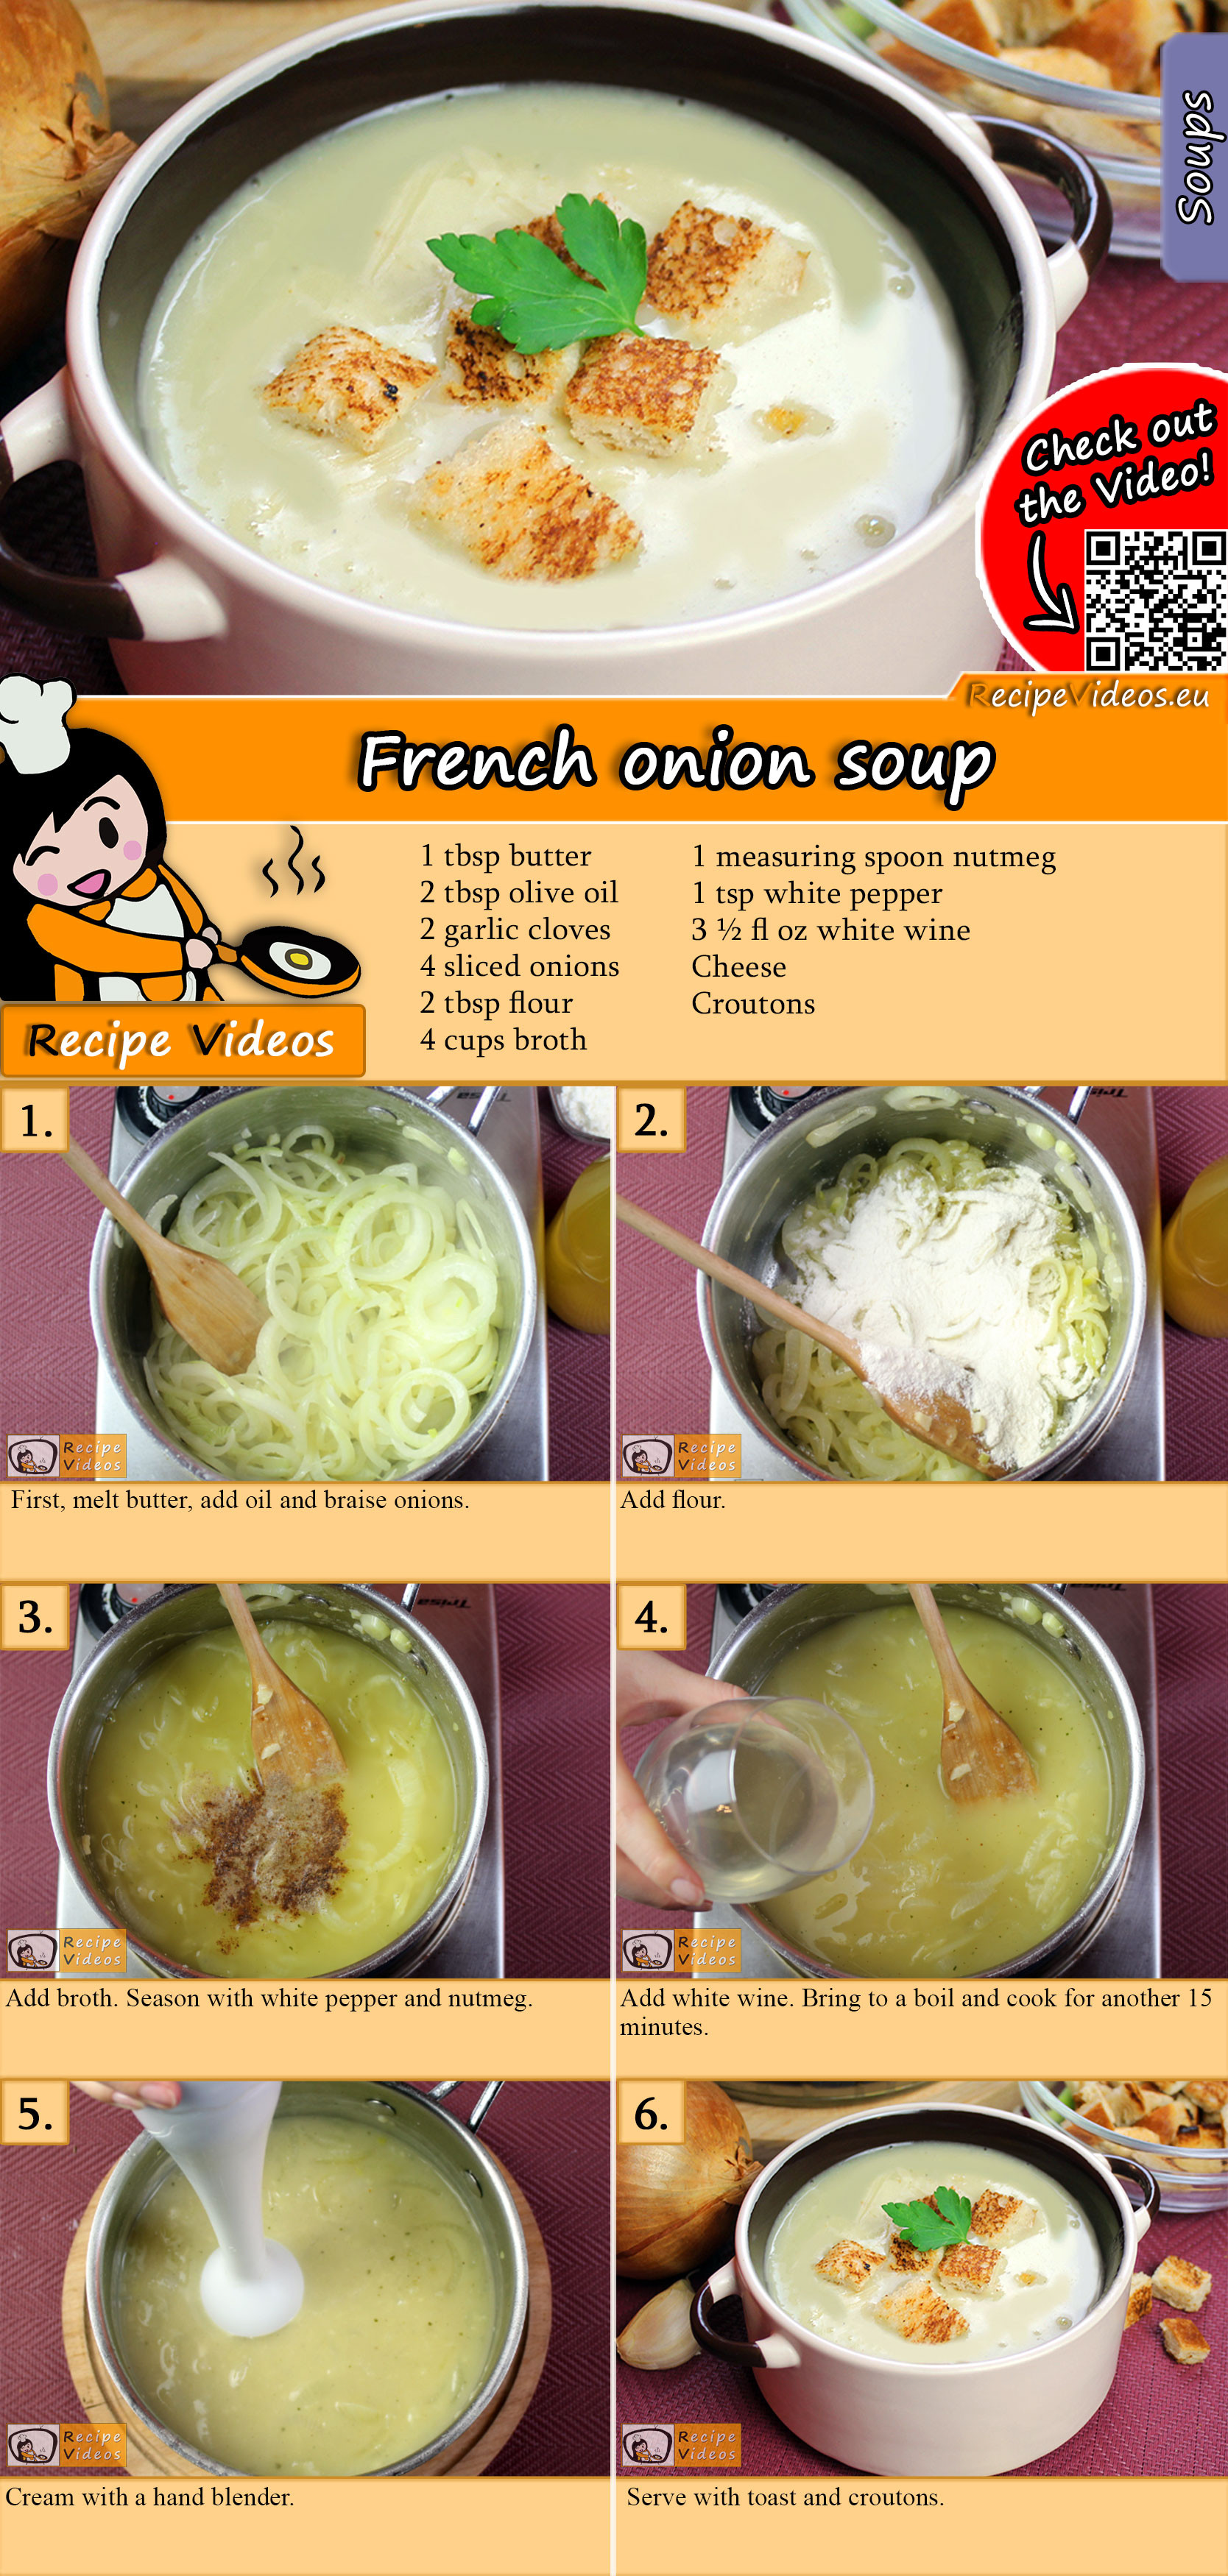 French onion soup recipe with video